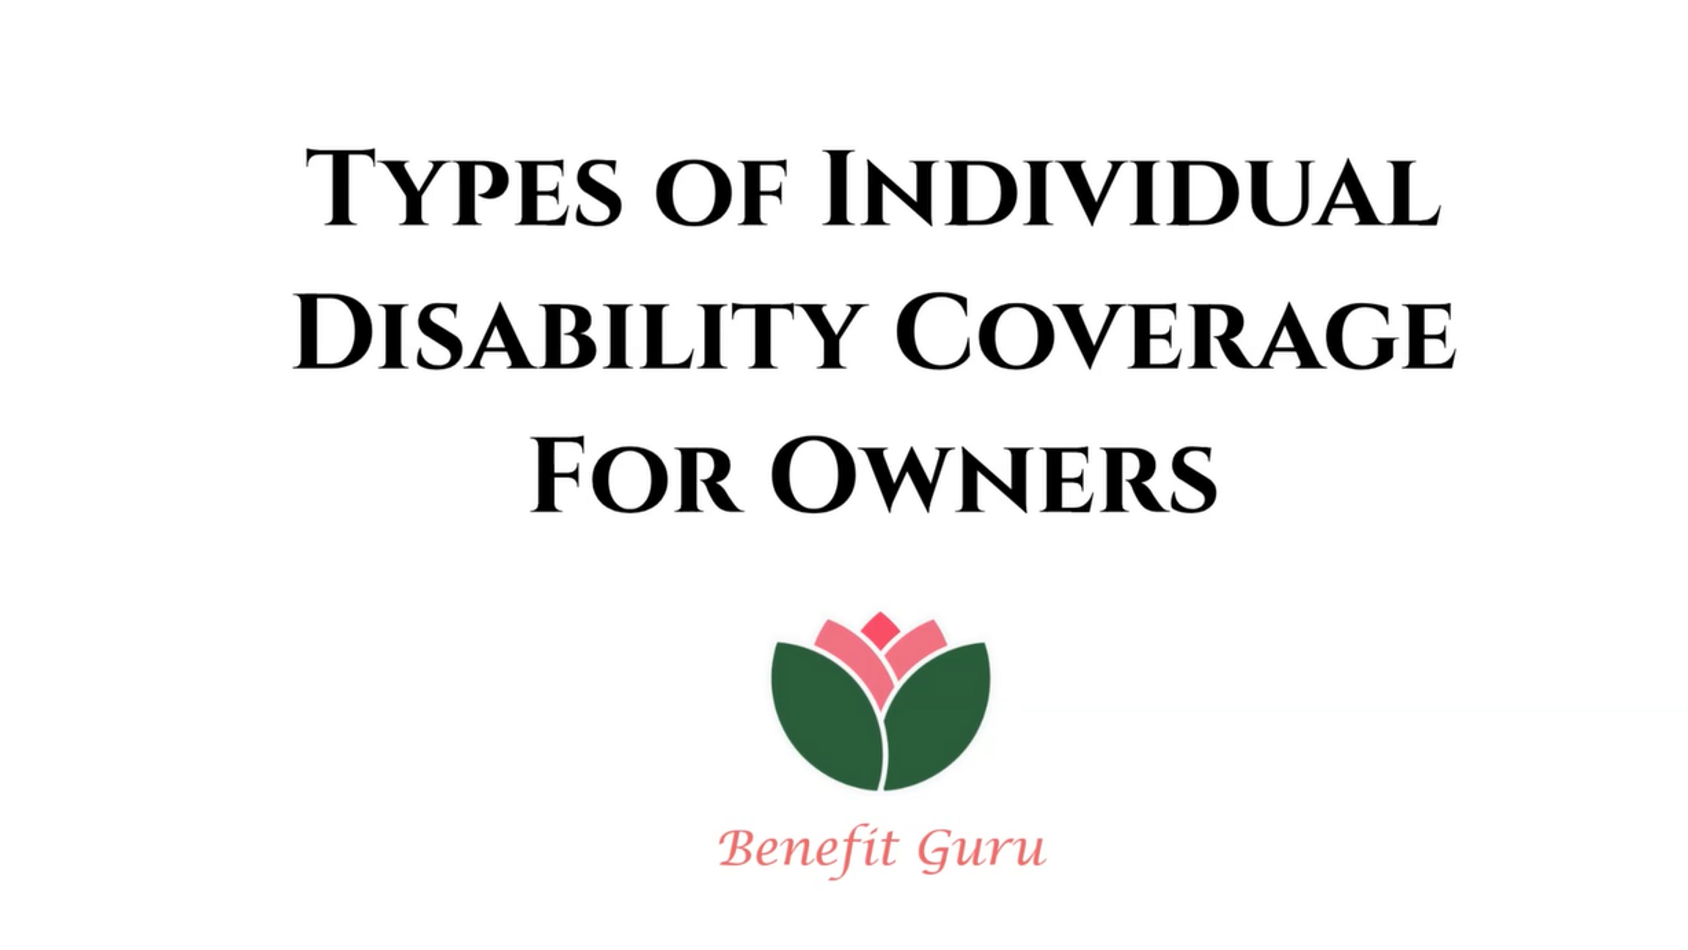 Types of Individual Disability Coverage for Owners